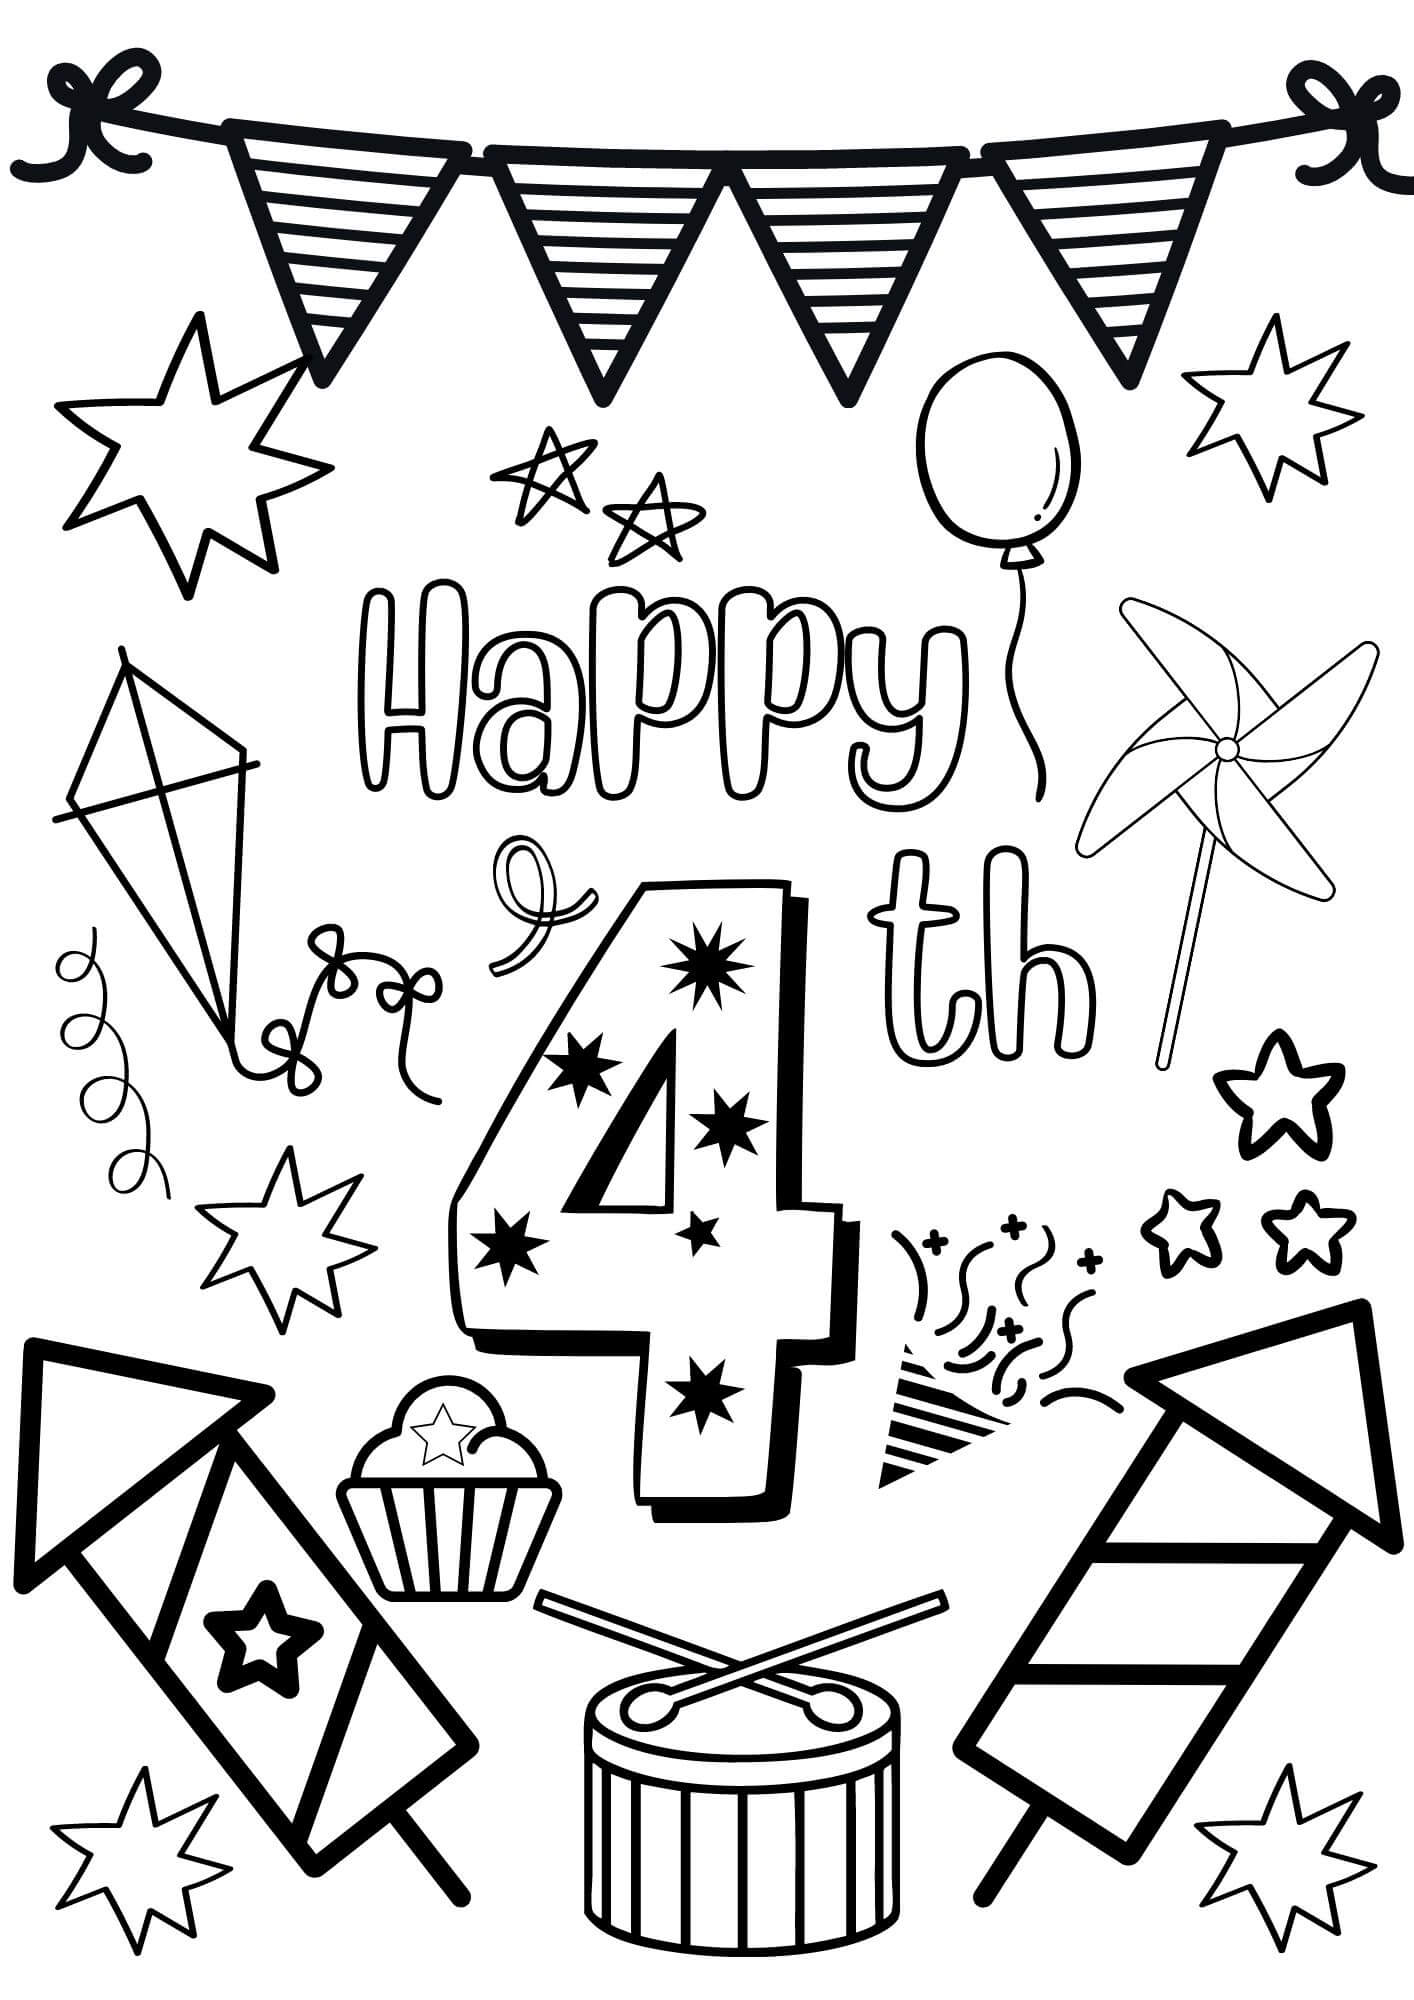 Celebrate Freedom with 4th of July: 180+ Free Coloring Pages 88